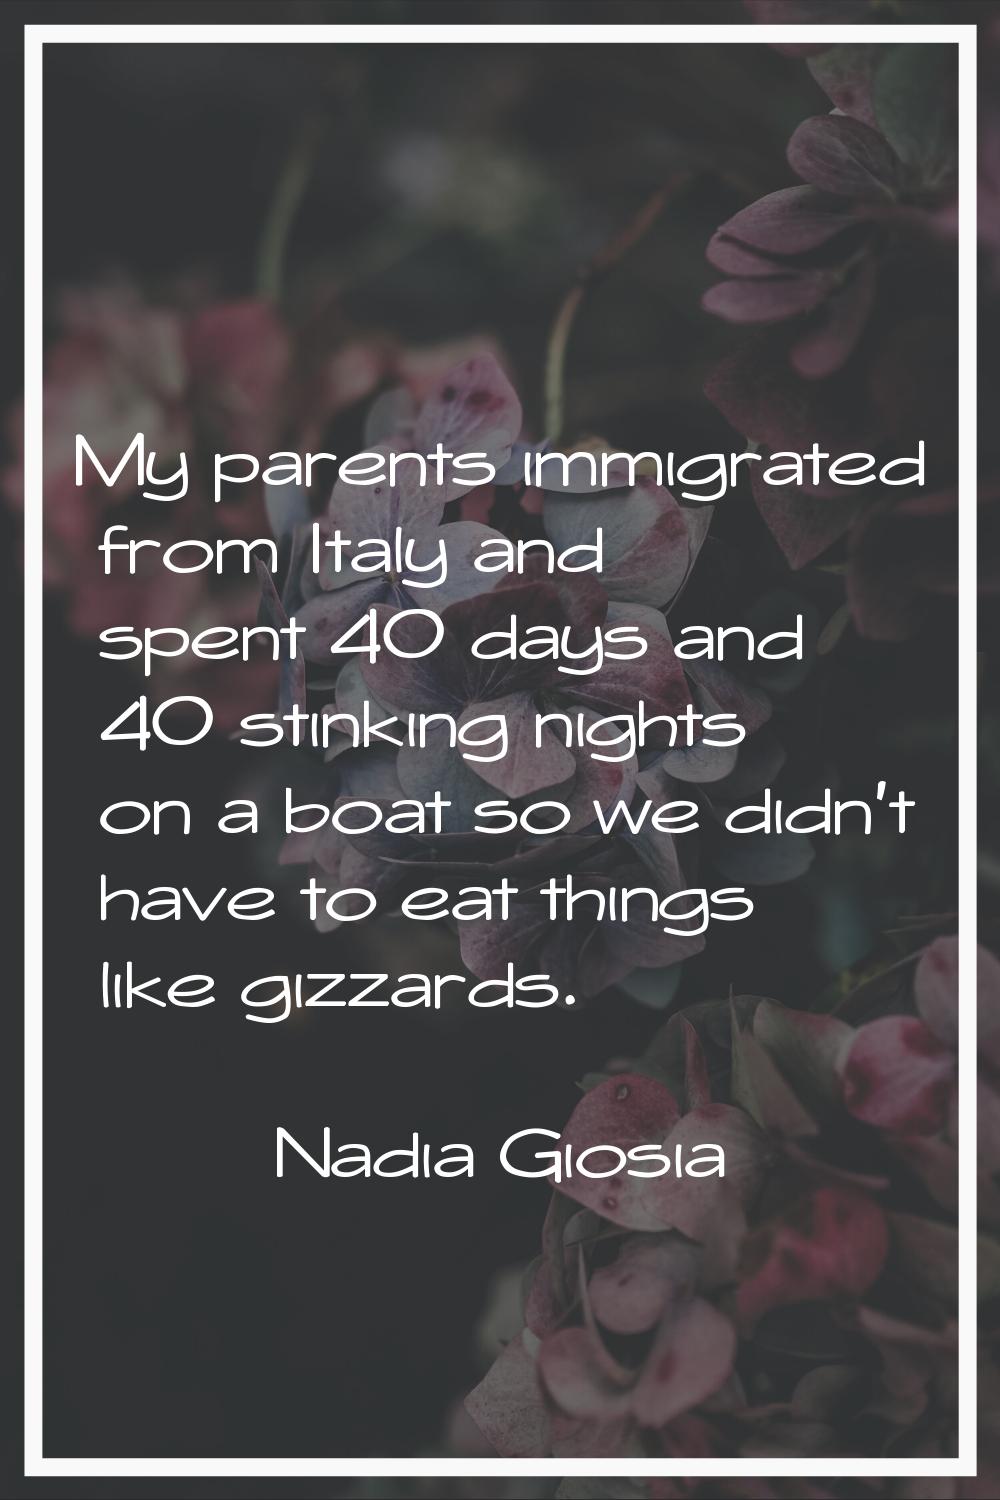 My parents immigrated from Italy and spent 40 days and 40 stinking nights on a boat so we didn't ha